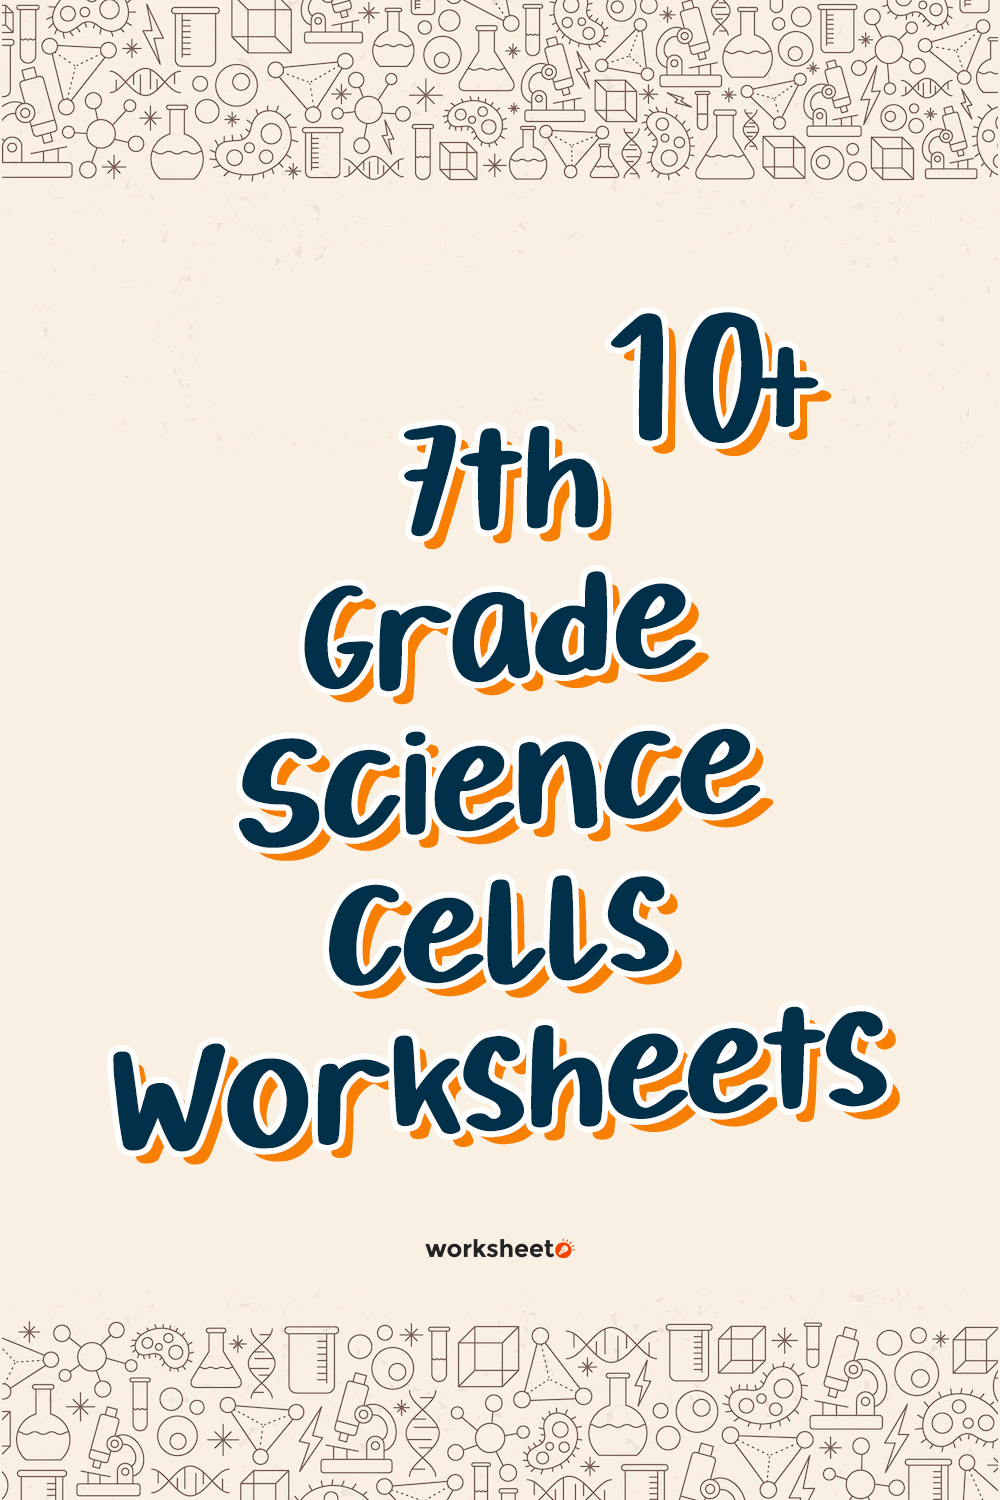 18 Images of 7th Grade Science Cells Worksheets